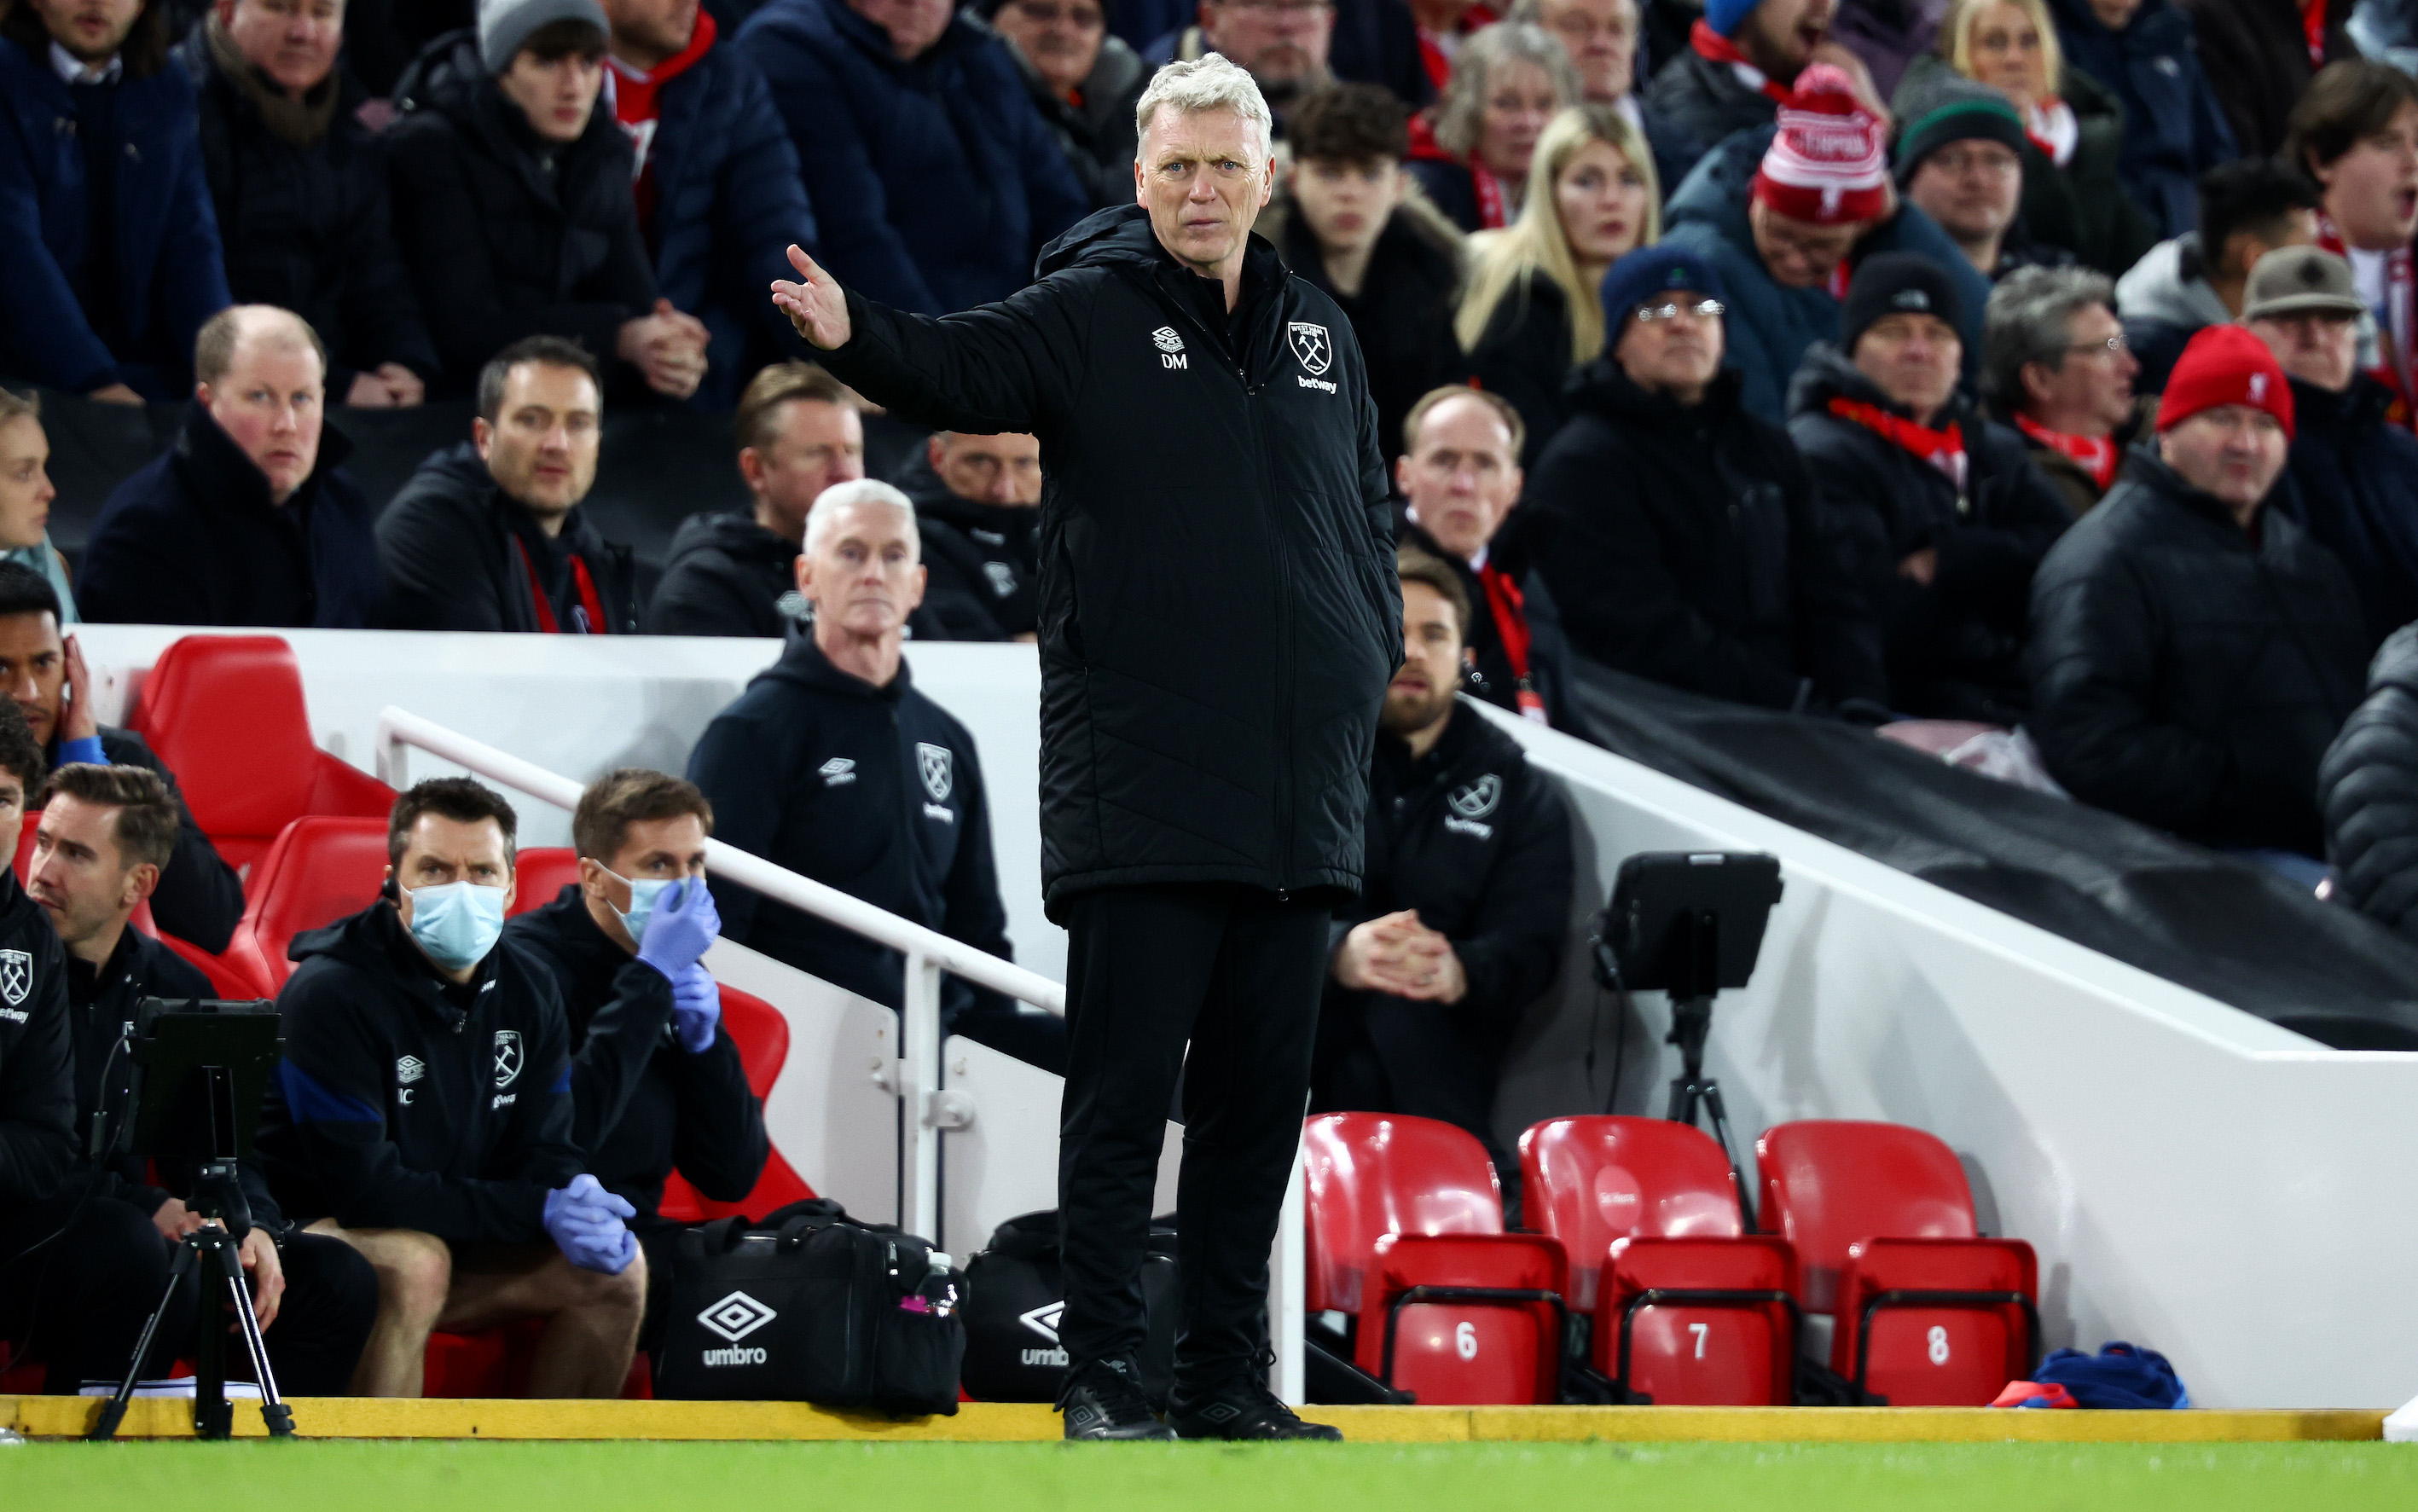 David Moyes admits he asked Jurgen Klopp for Sevilla advice and reveals Liverpool boss was full of praise for West Ham